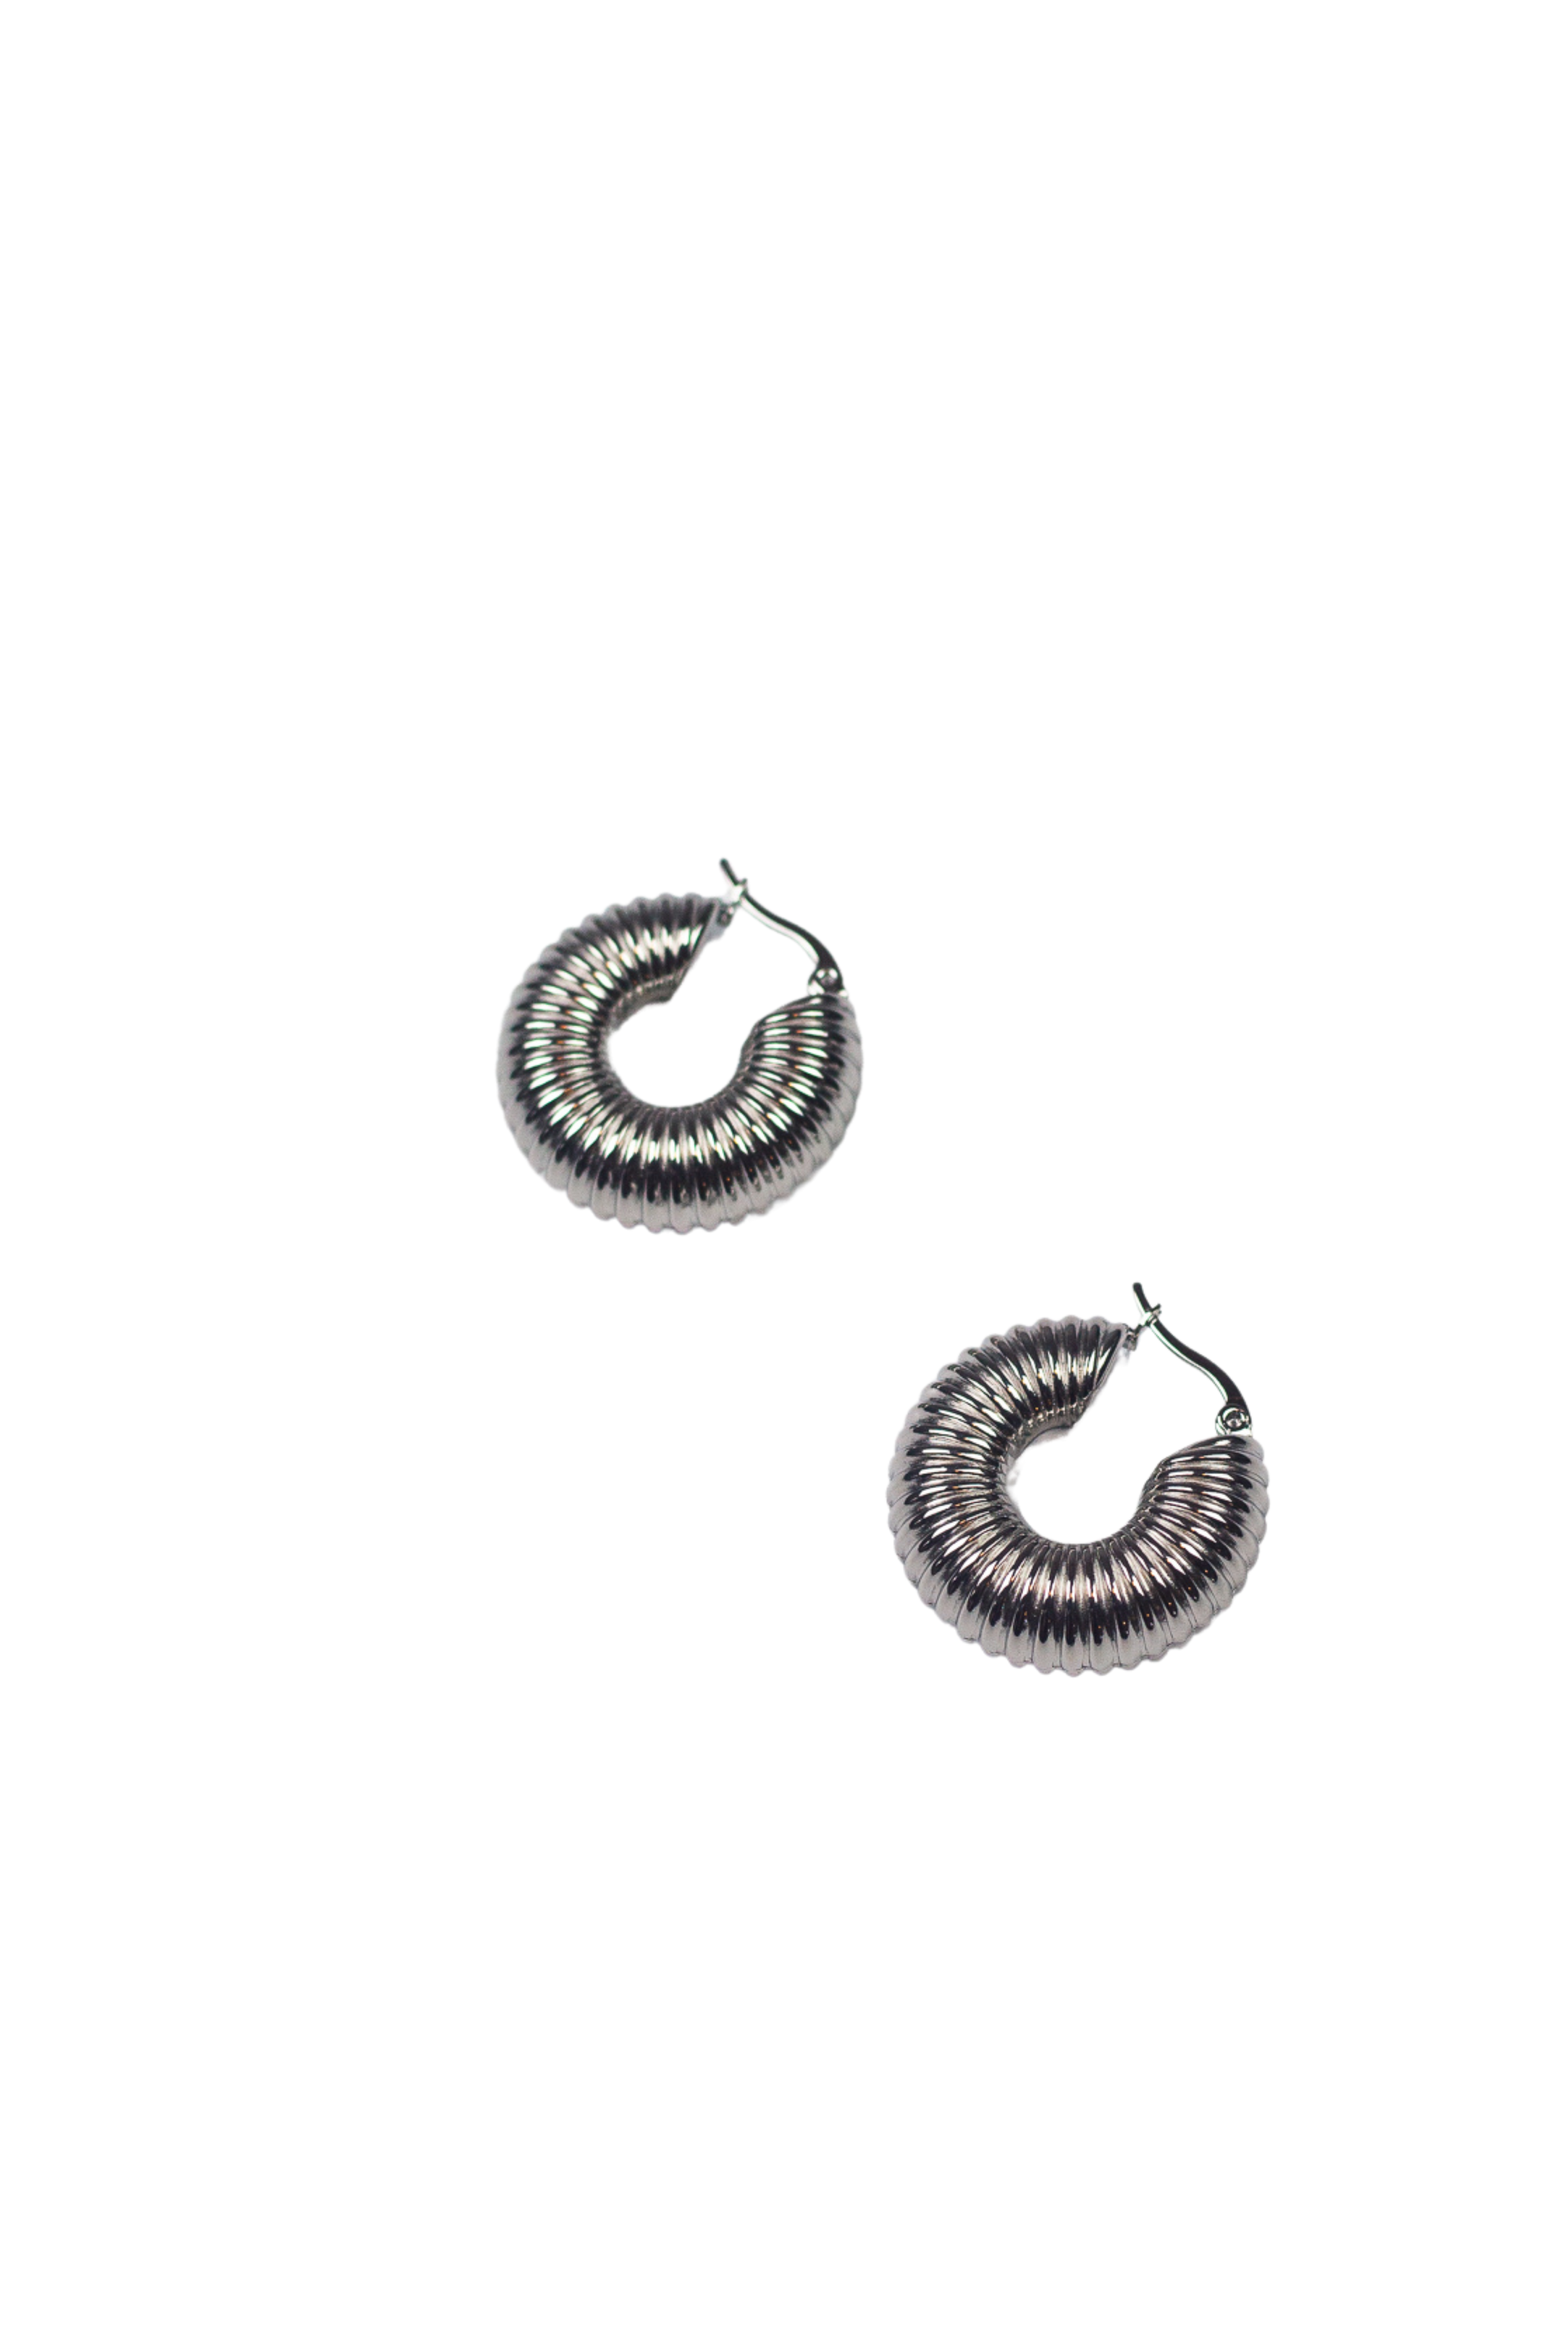 Silver stainless steel hoop earrings. Named Chunky Croissant Hoops by E's Element.